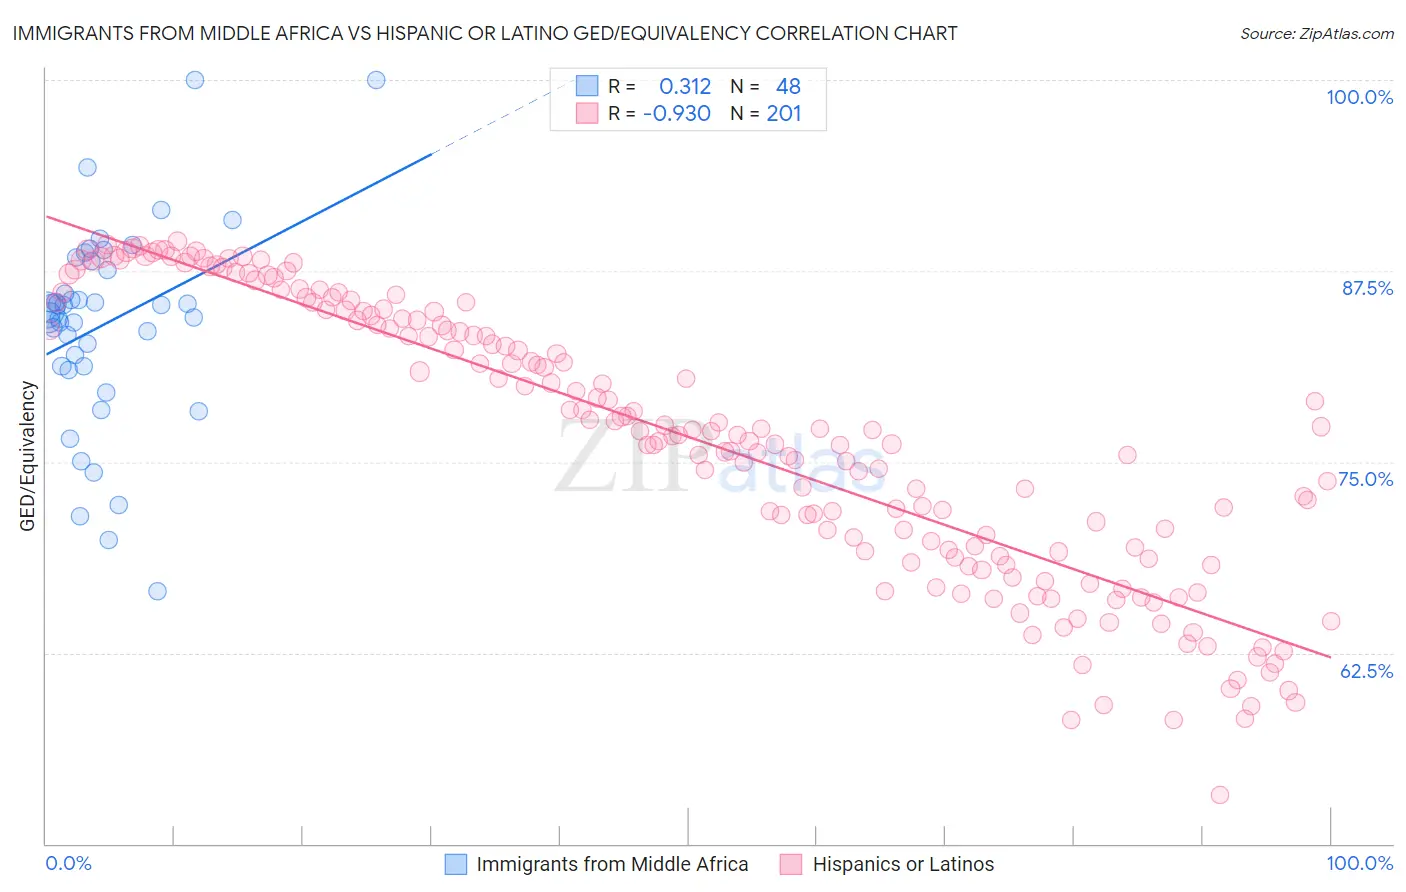 Immigrants from Middle Africa vs Hispanic or Latino GED/Equivalency